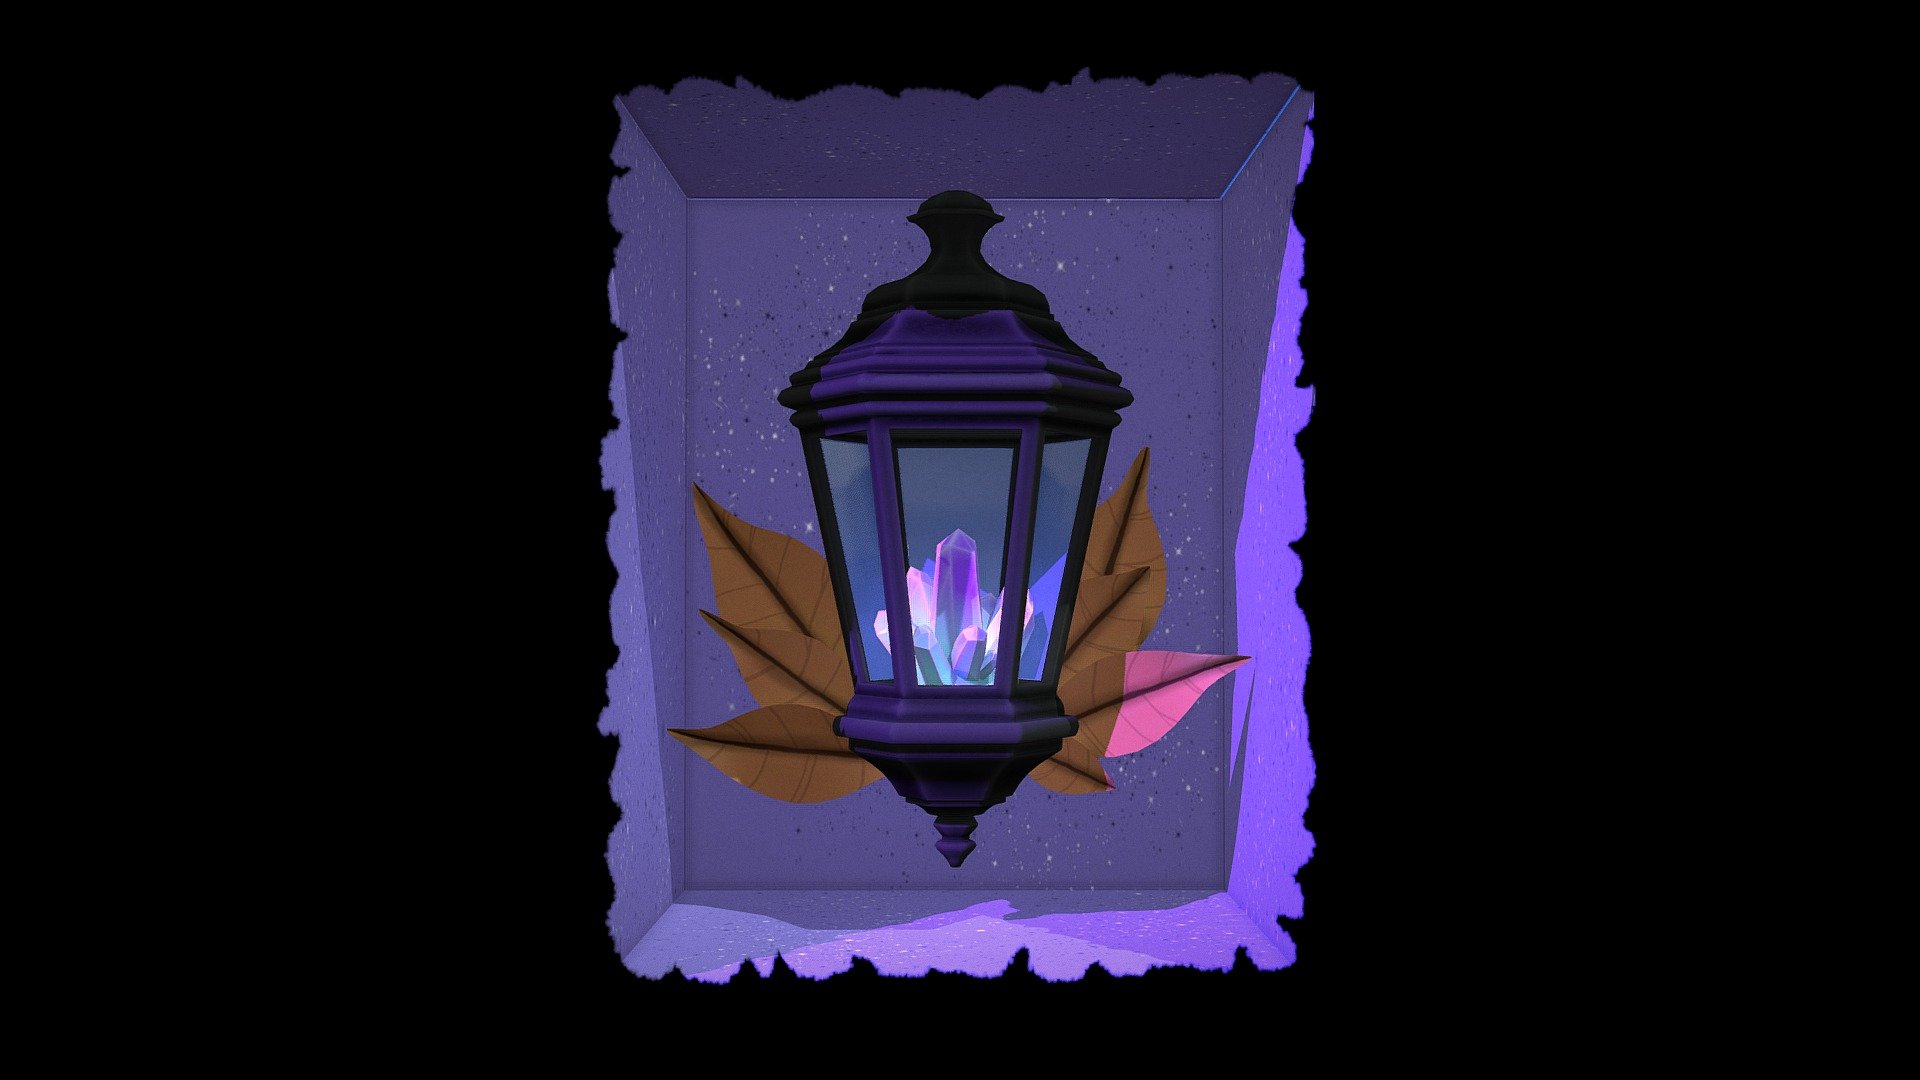 3D model of an Amethyst crystal lantern, inspired by some lantern and crystals illustrations 3d model